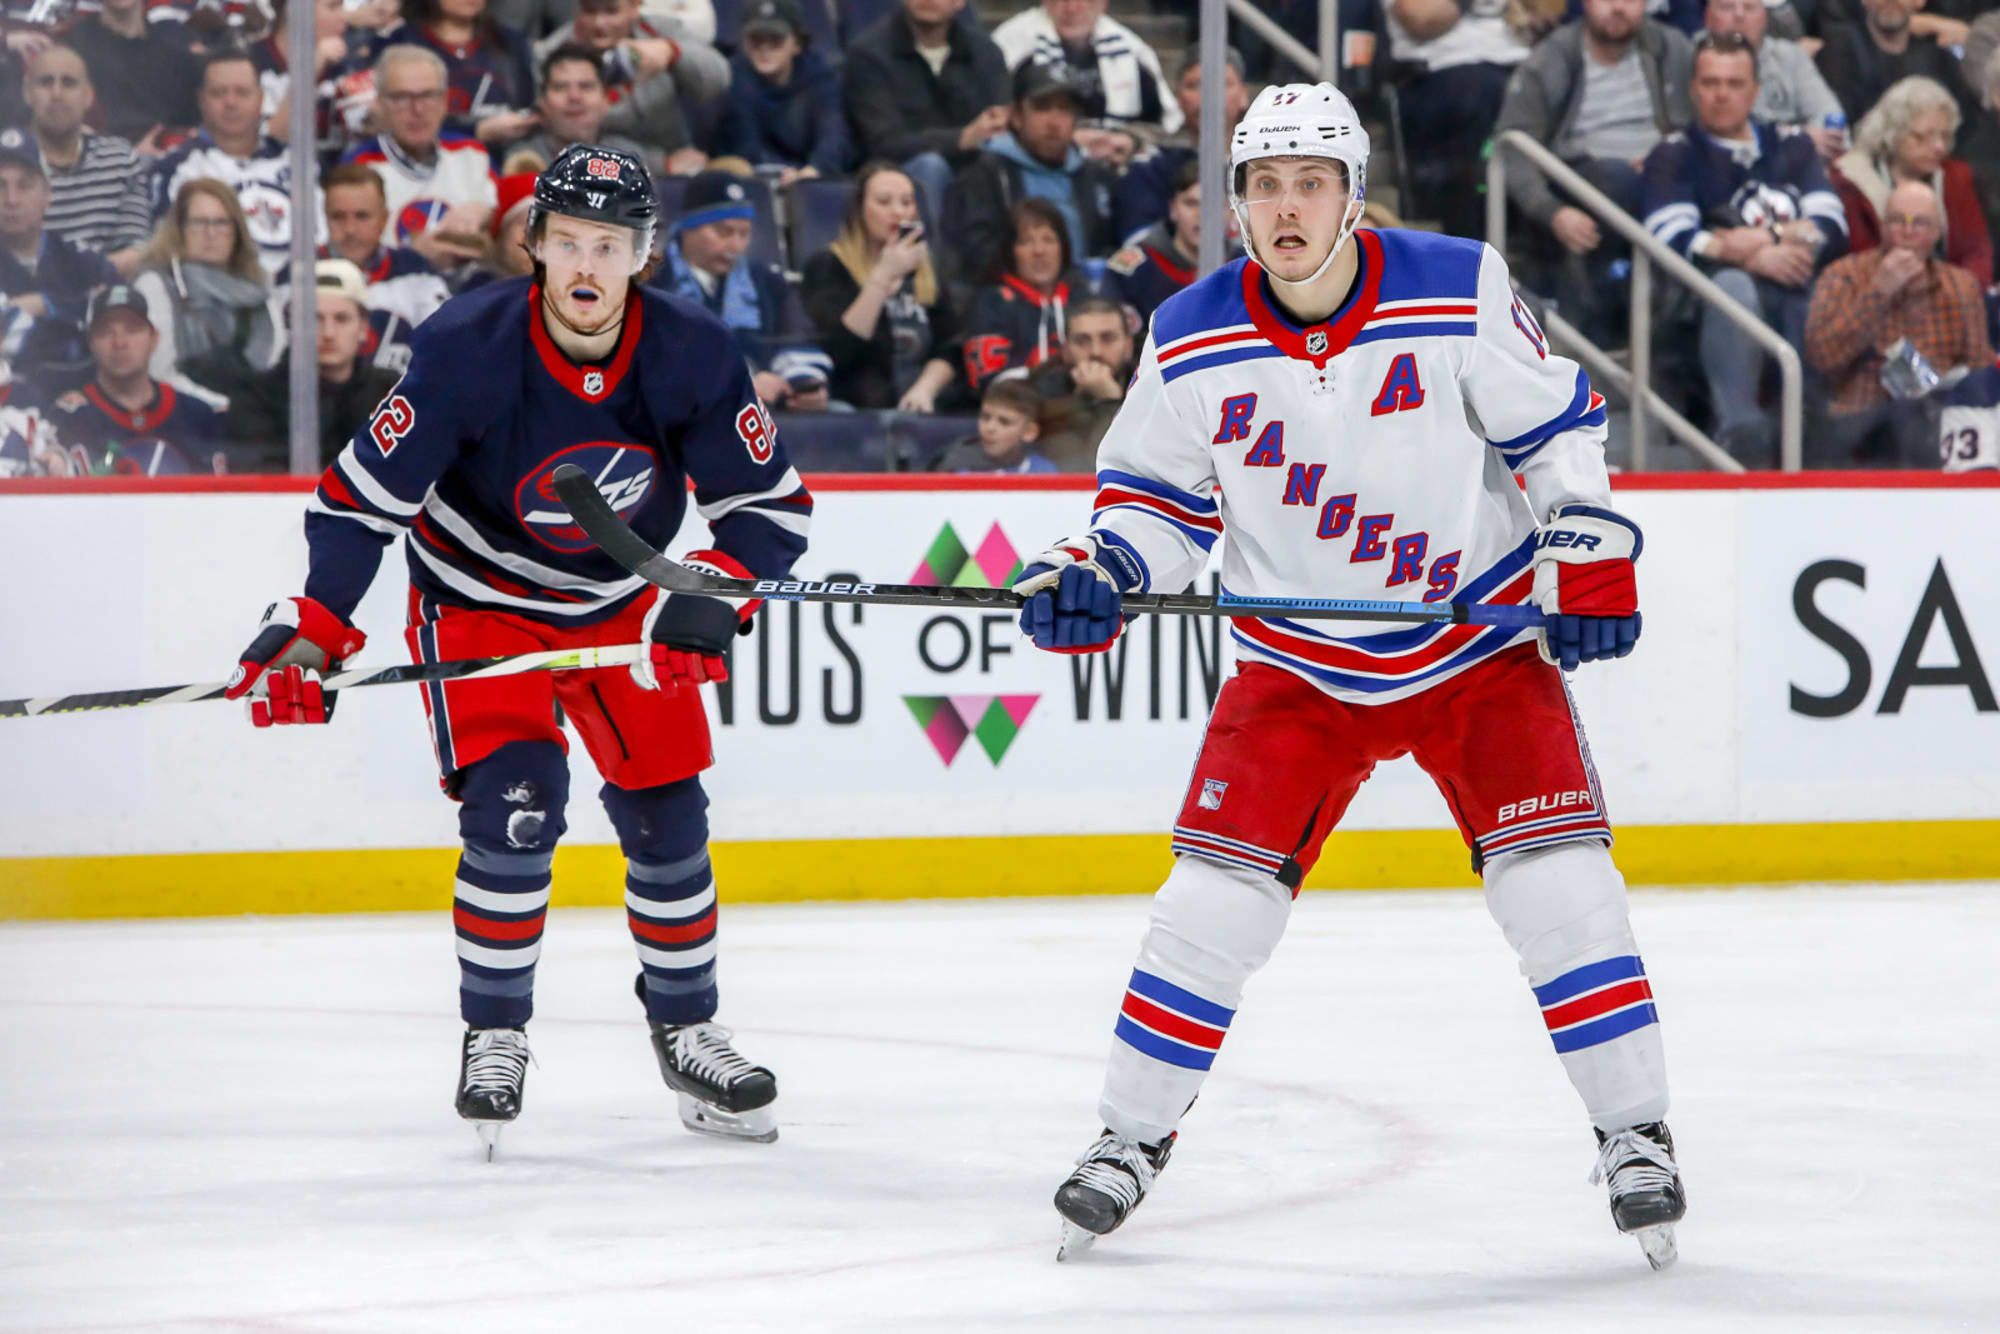 New York Rangers playoff picture A quiet night for scoreboard watching